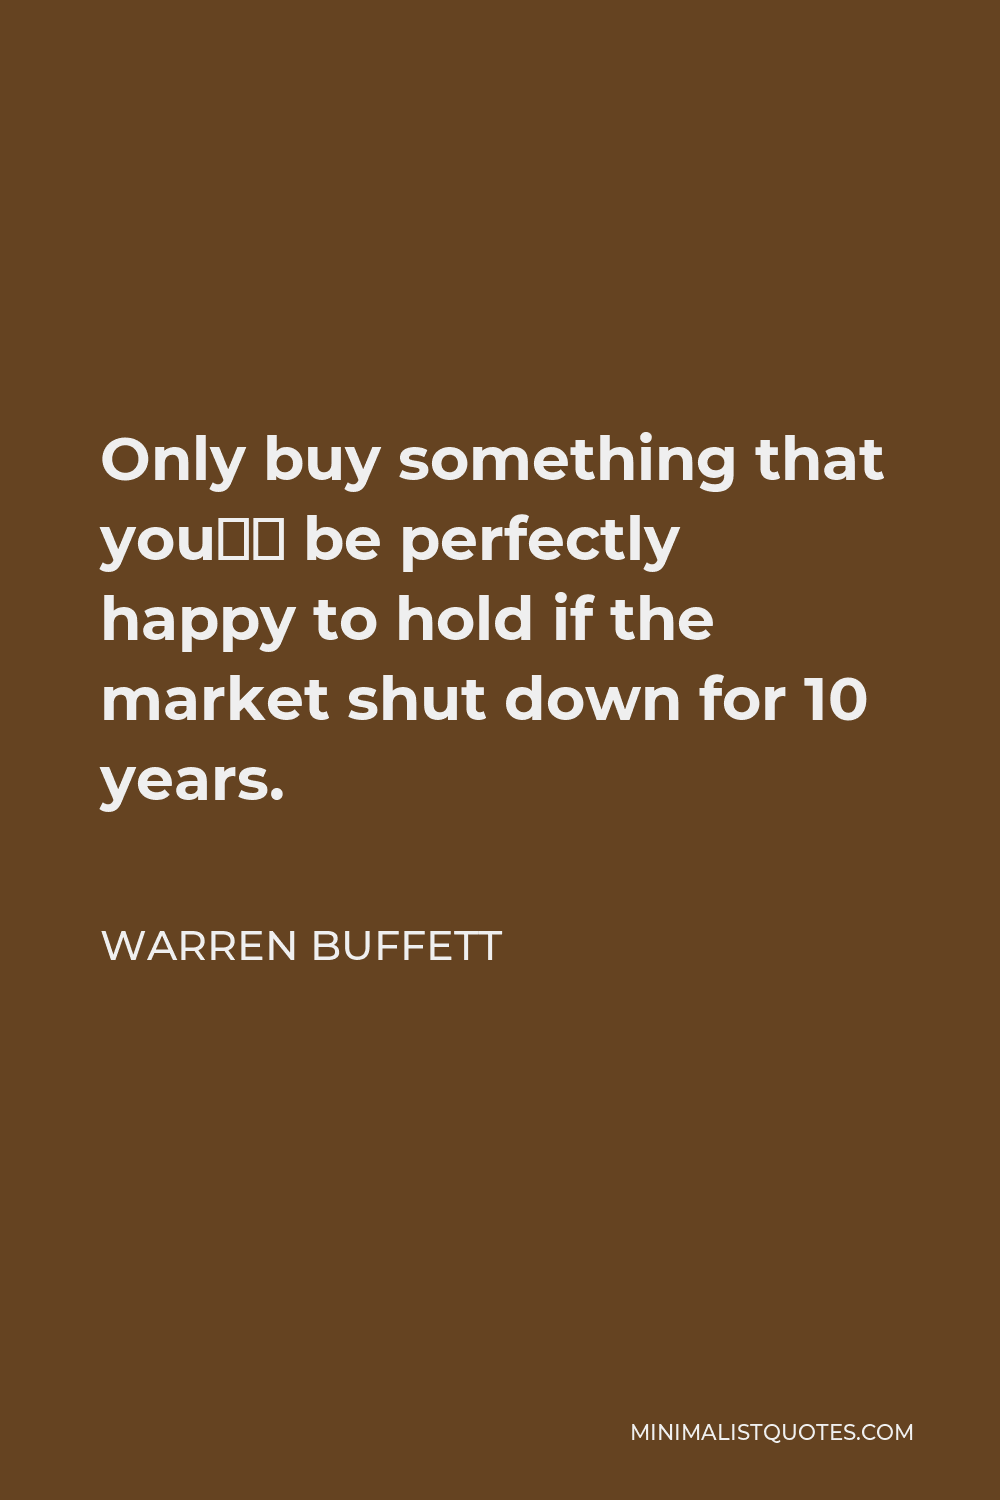 Warren Buffett Quote - Only buy something that you’d be perfectly happy to hold if the market shut down for 10 years.